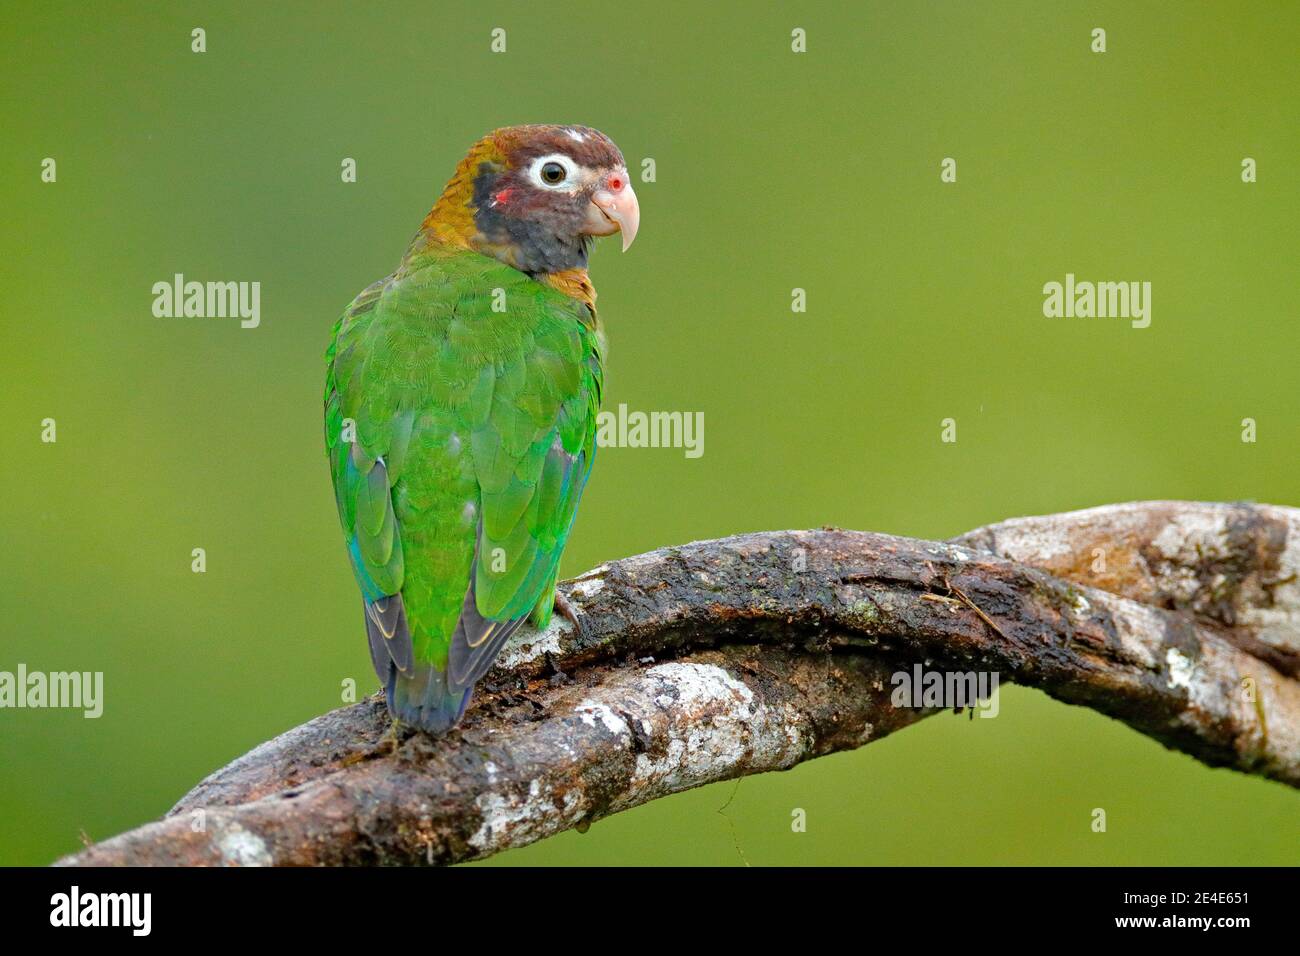 Tropic bird Brown-hooded Parrot, Pionopsitta haematotis, Mexico, green parrot with brown head. Detail close-up portrait of bird from Central America. Stock Photo